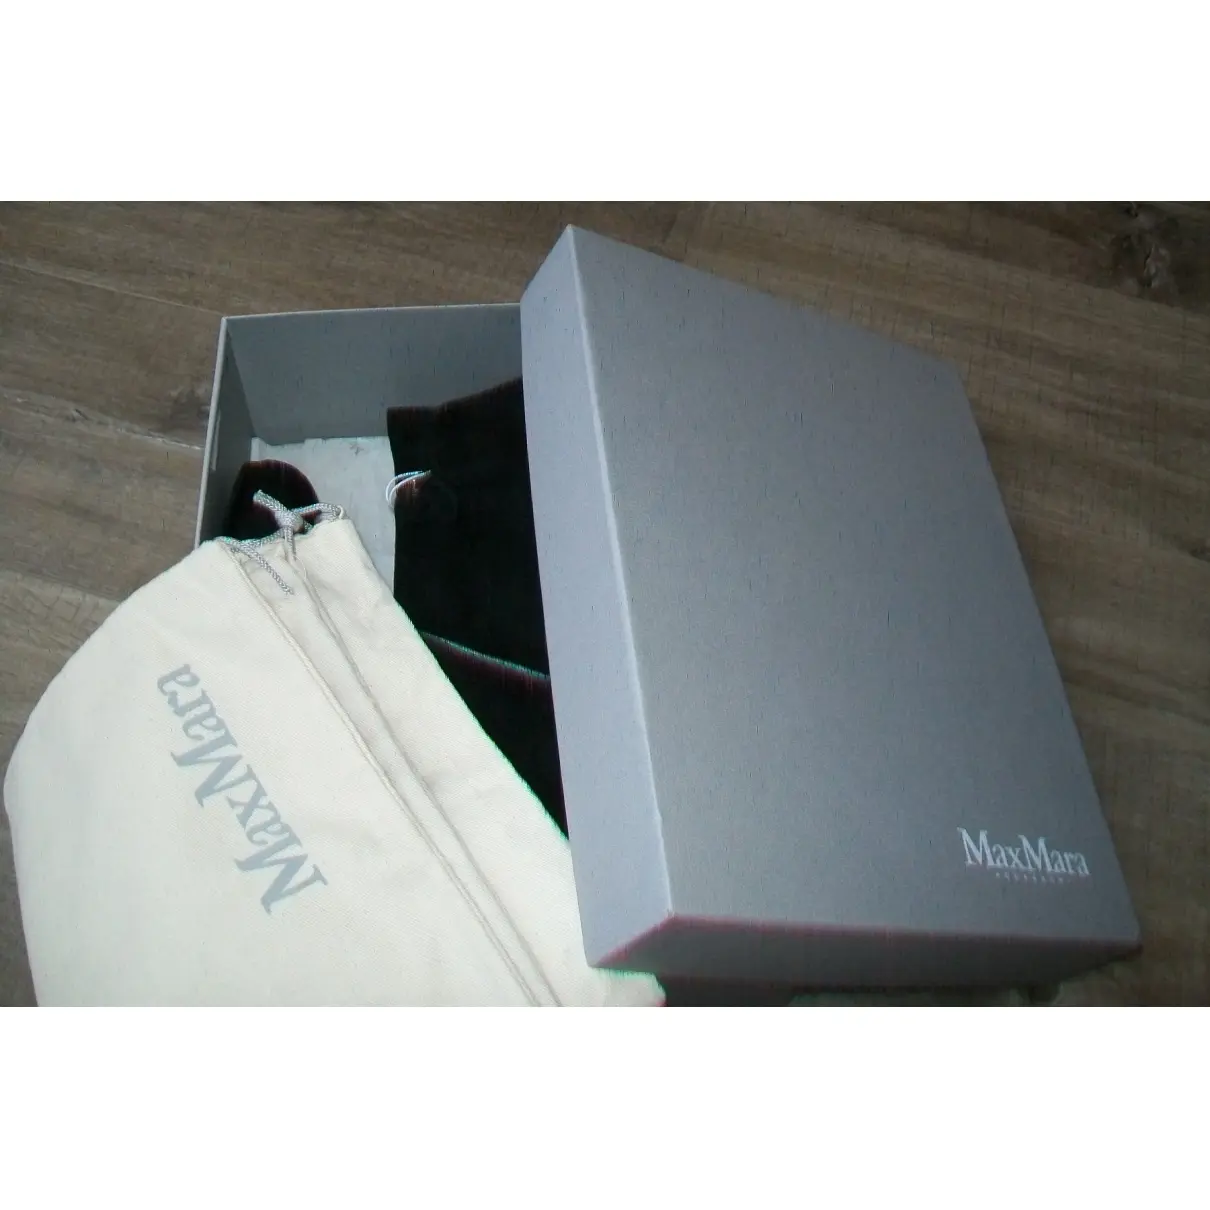 Max Mara Boots for sale